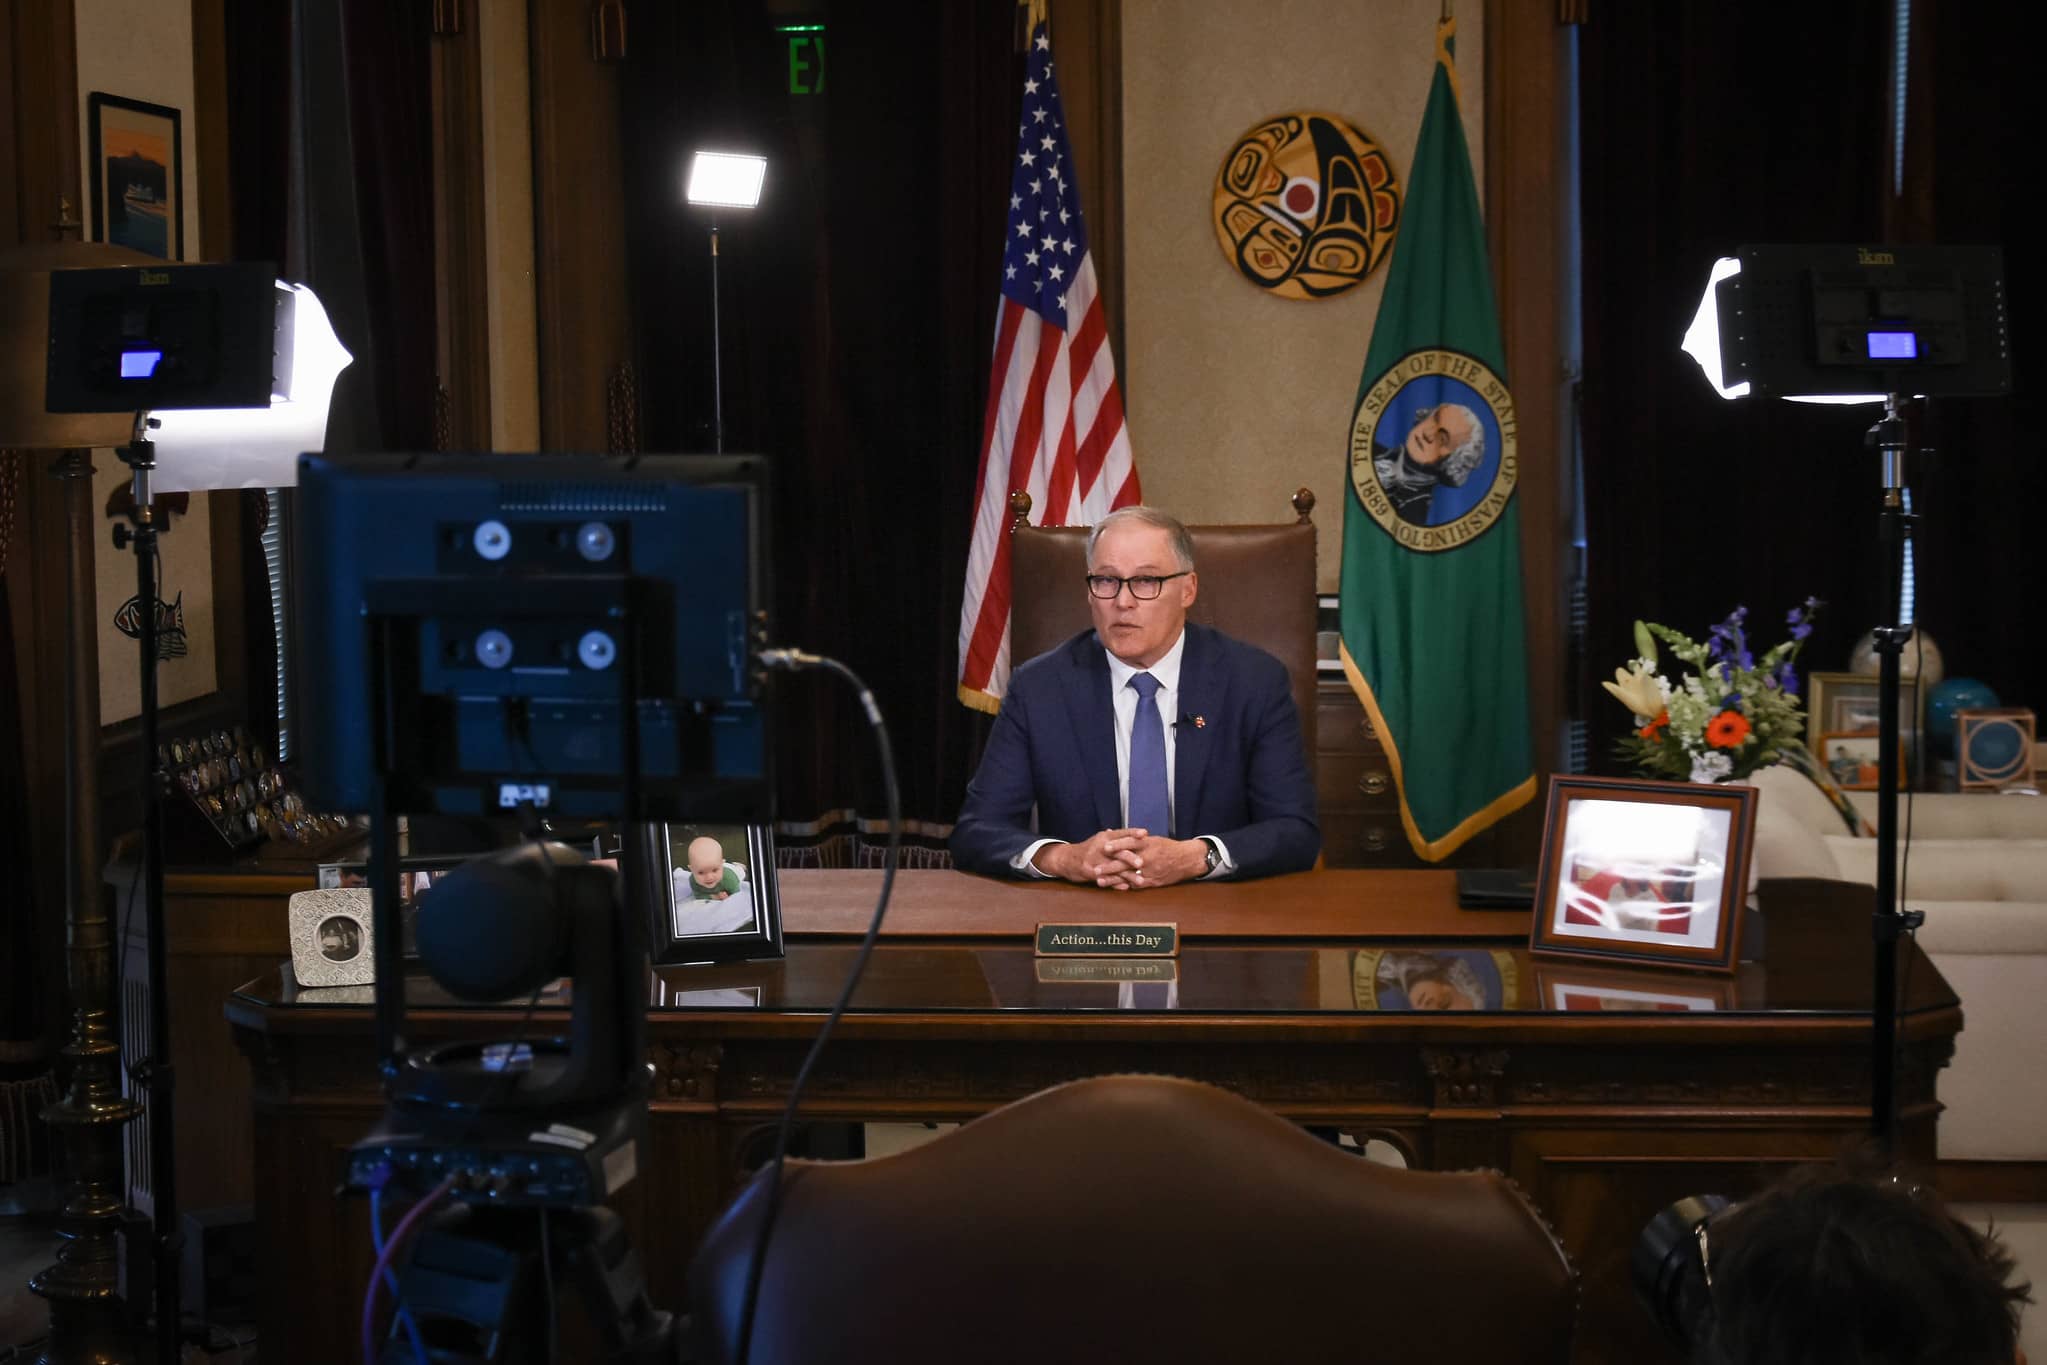 Washington Governor Jay Inslee addressing citizens from his office during the Covid-19 pandemic